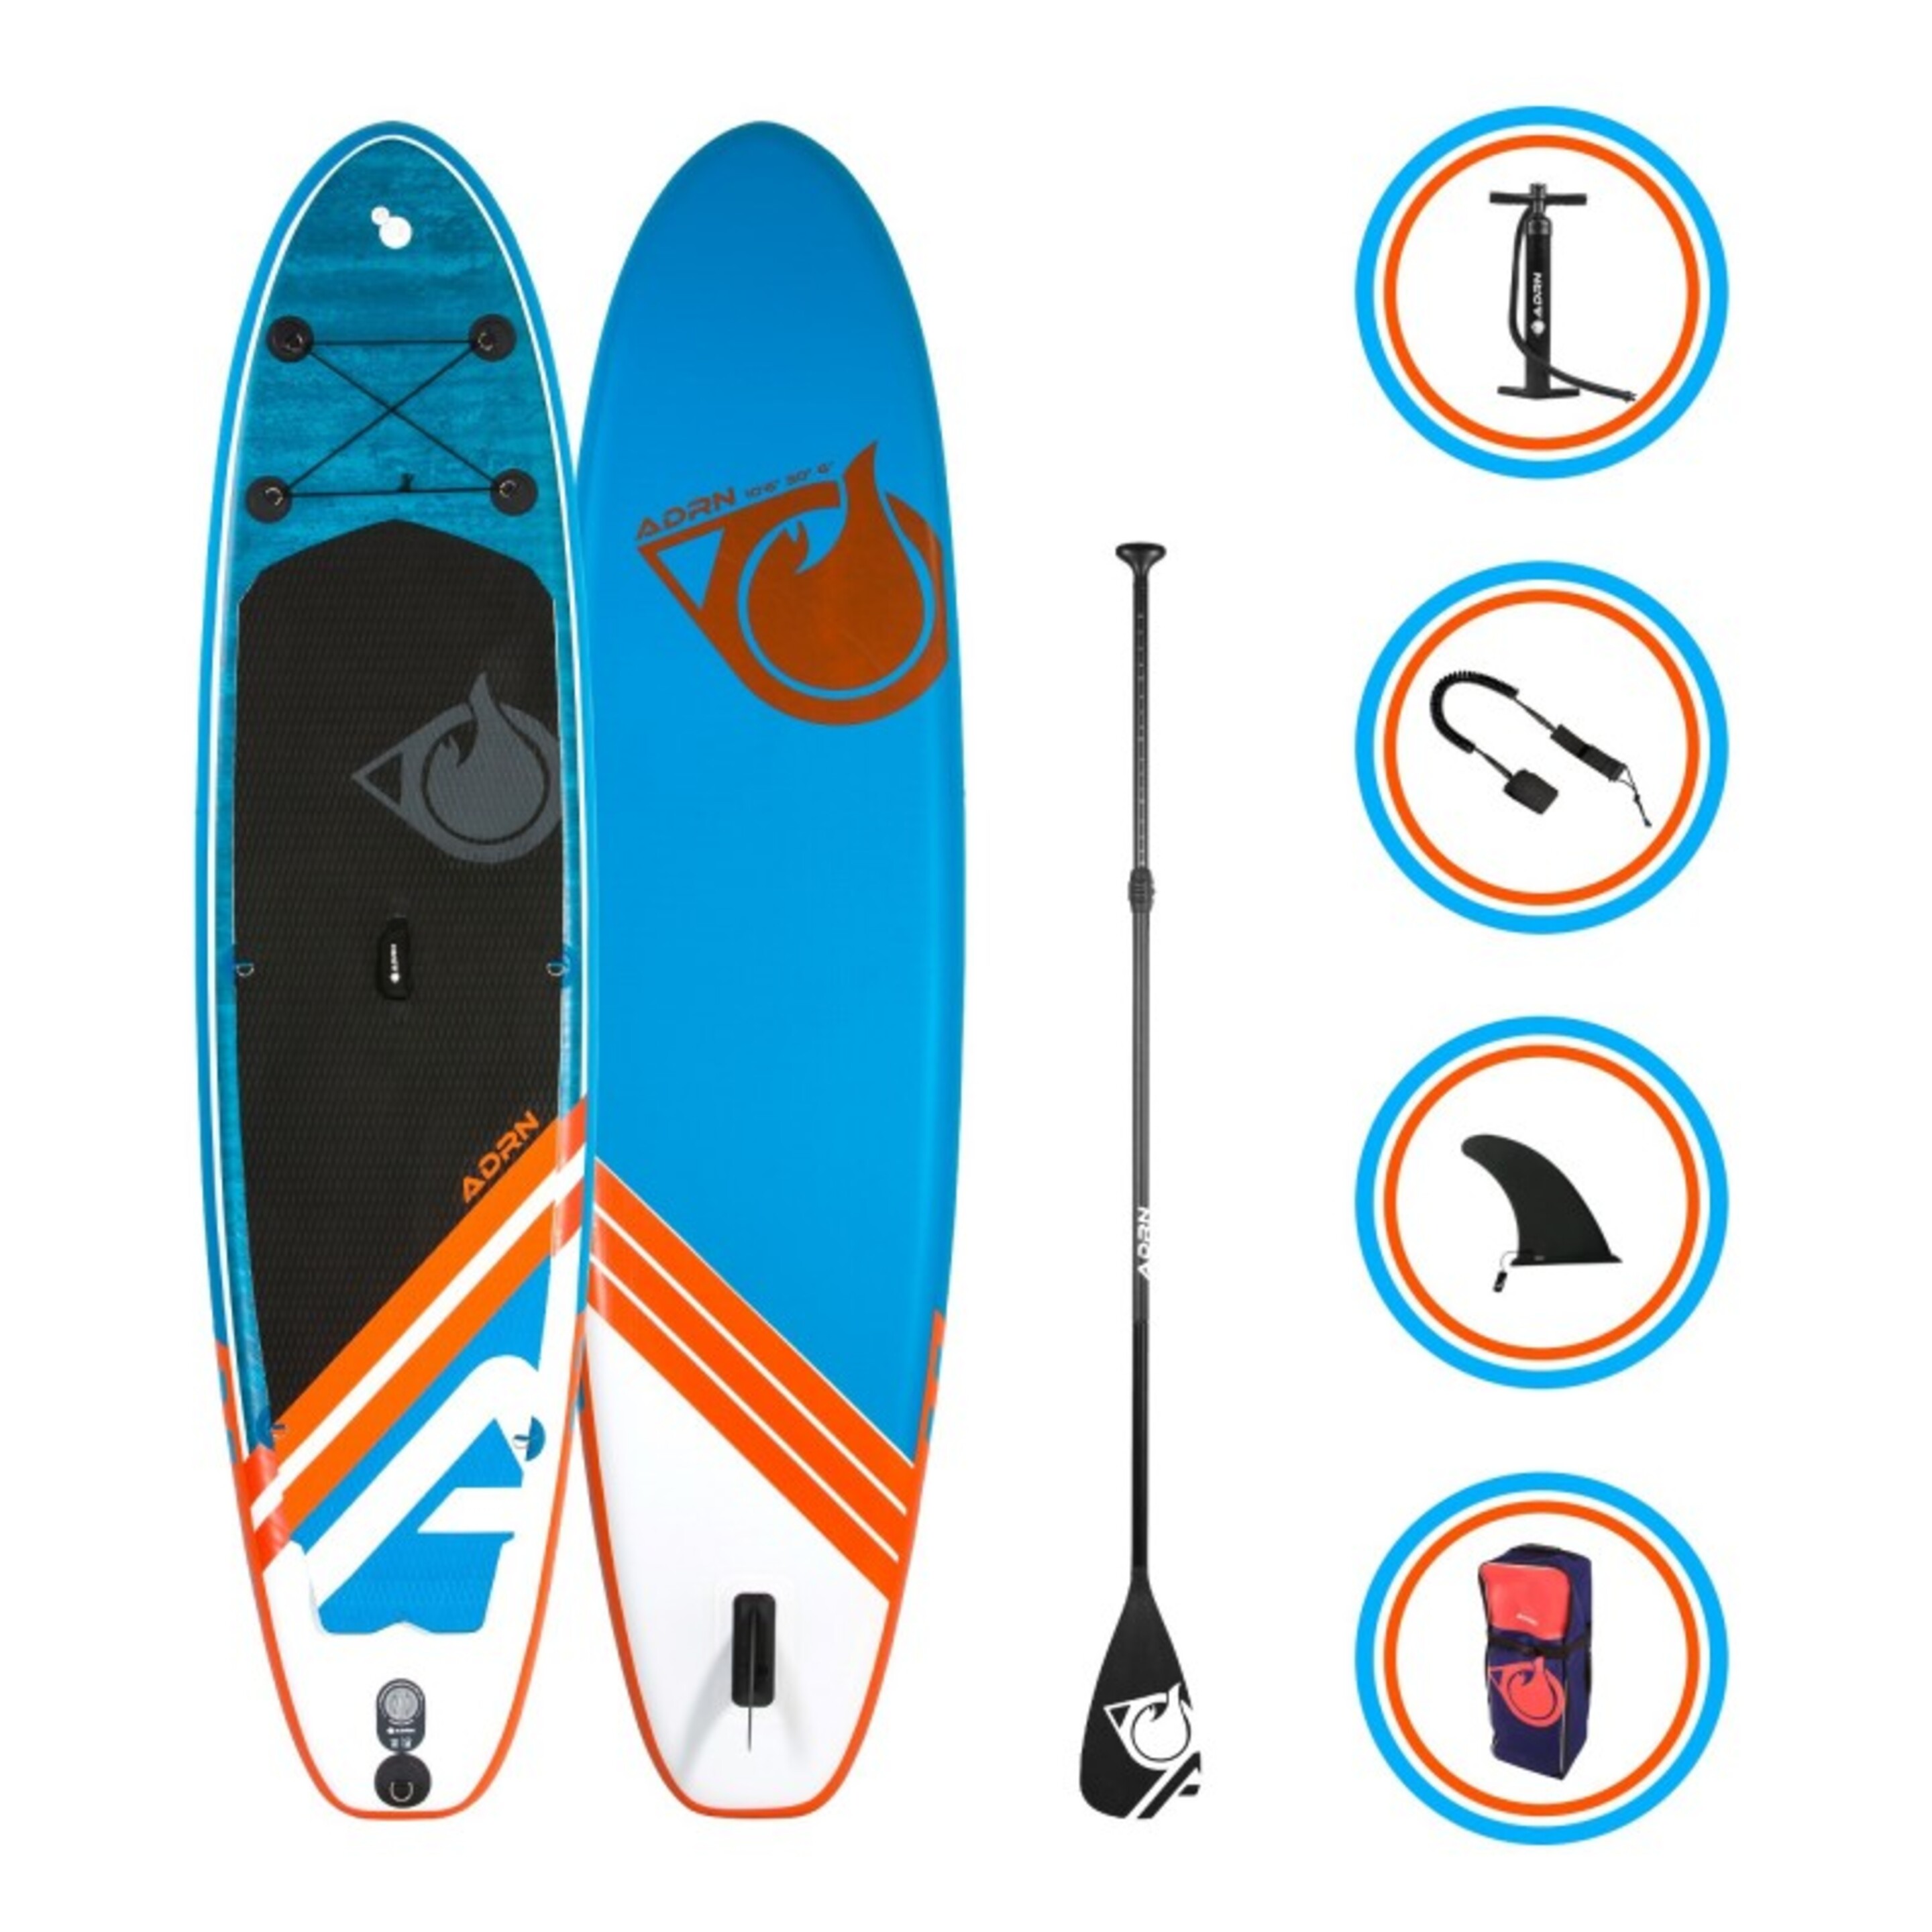 Paddle Hinchable Liner 10'6 + Accesorios 320 X 76 X 15 Cm